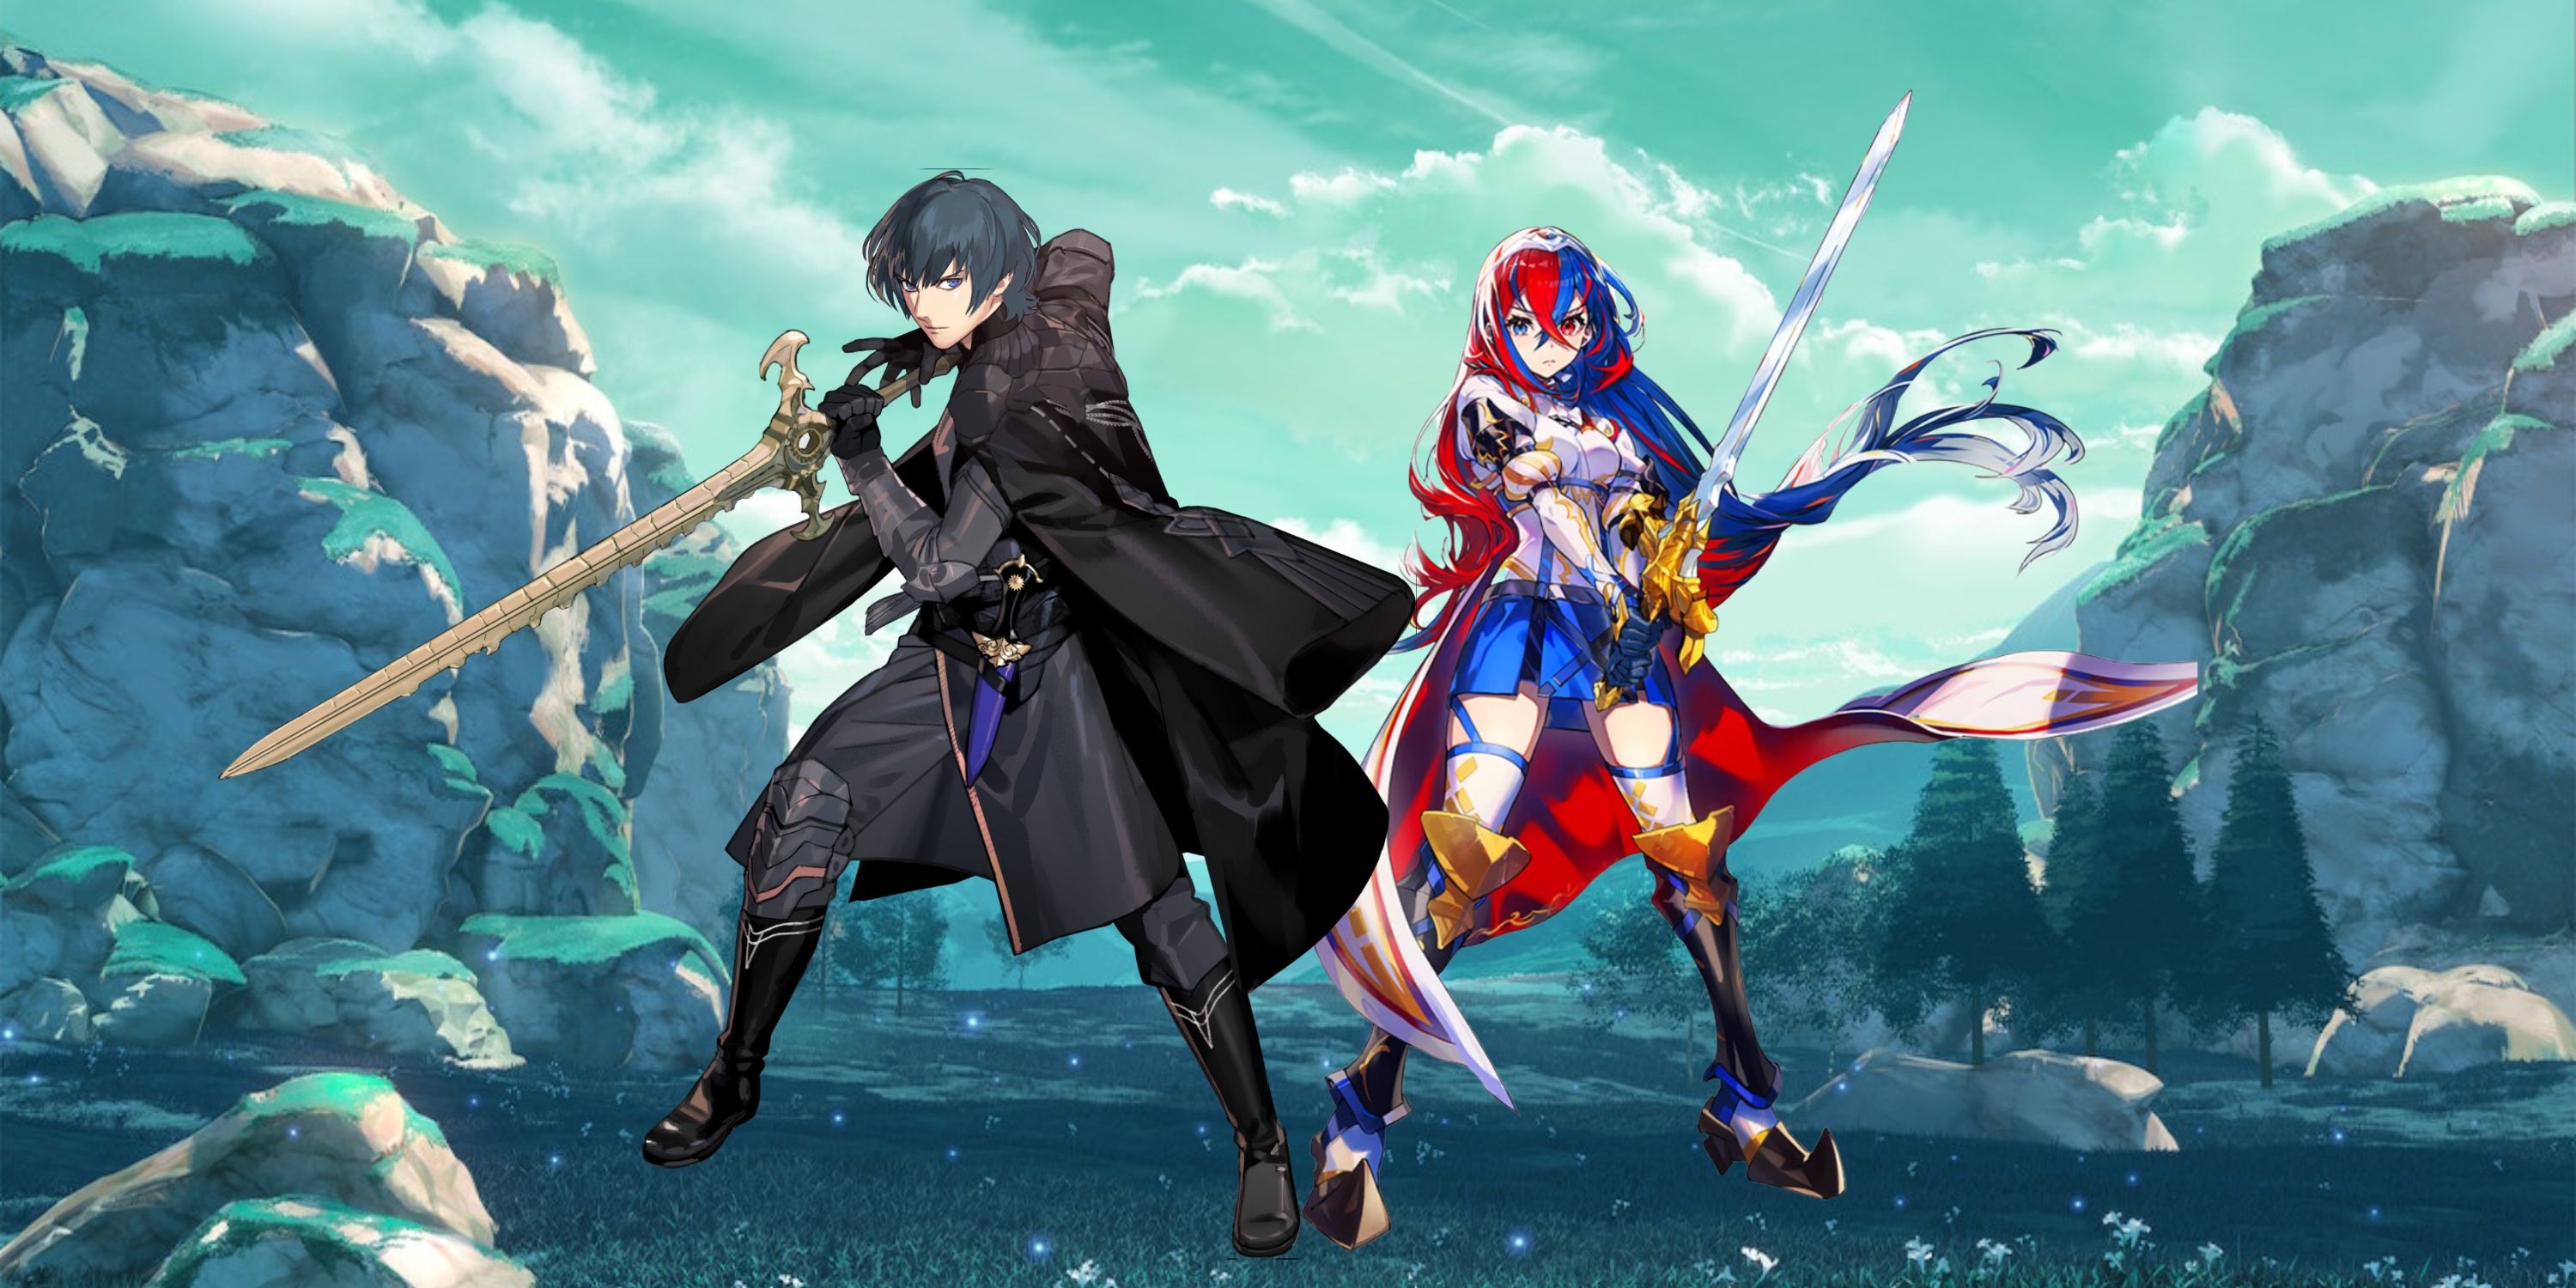 Fire Emblem Byleth and Alear